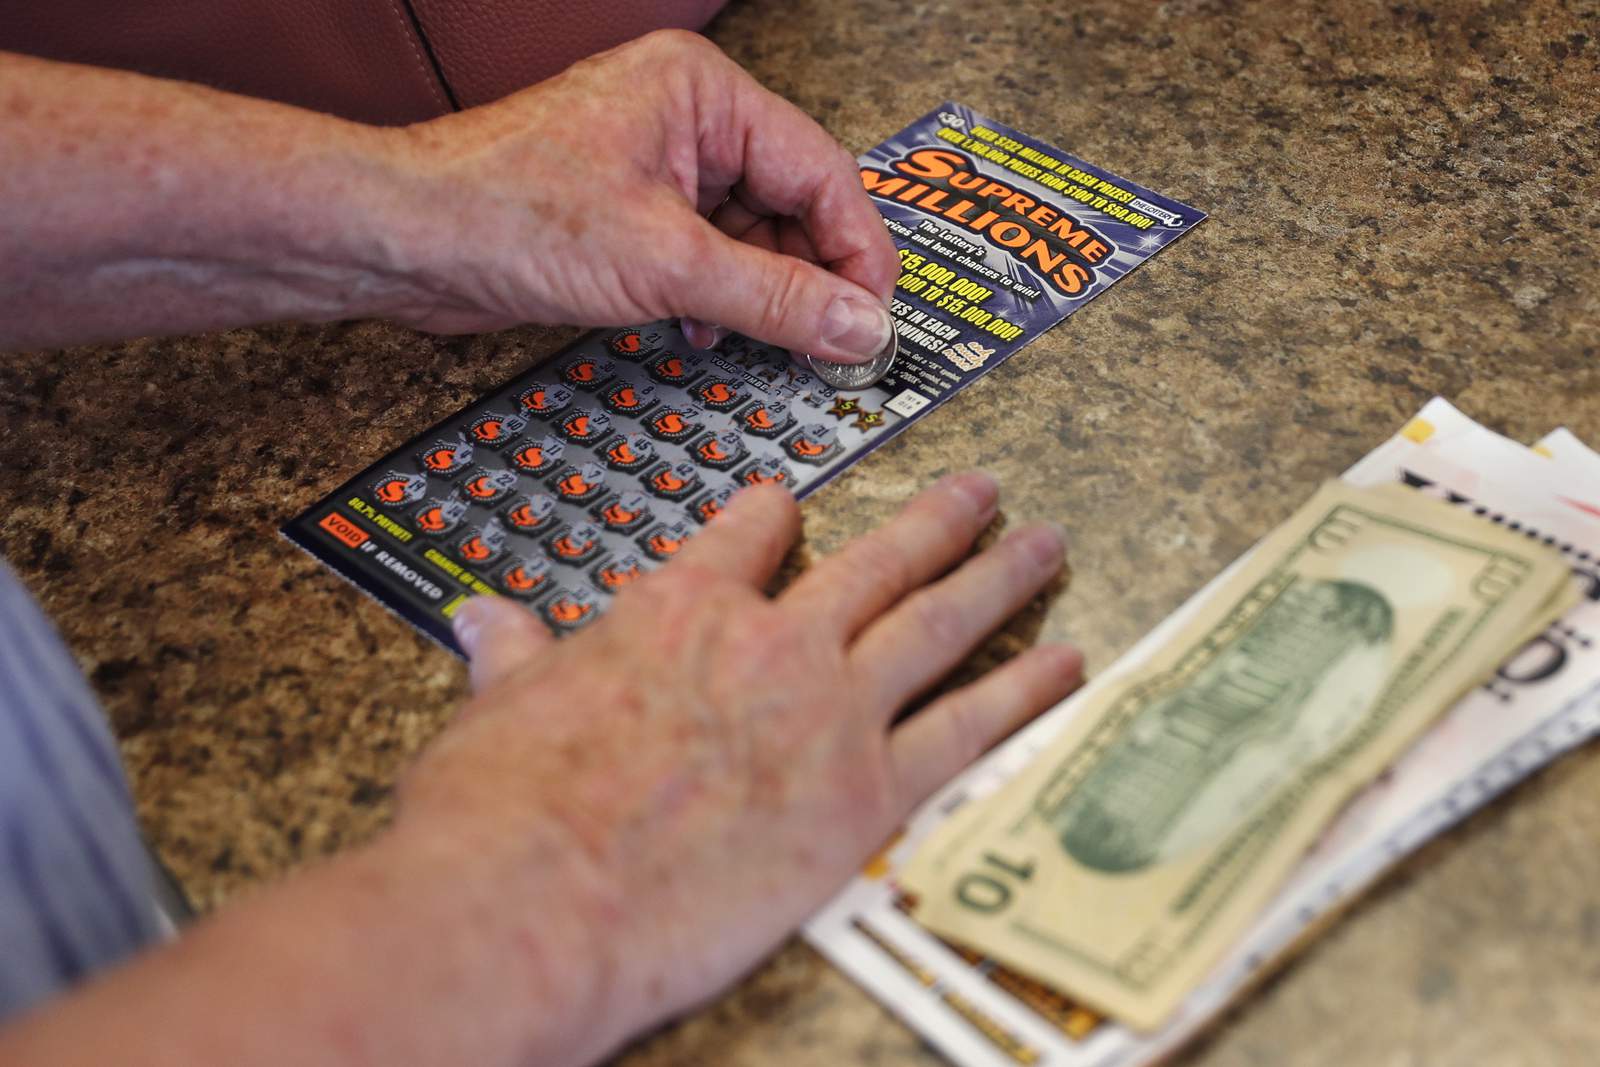 Miami-Dade man hits for $500,000 on scratch-off